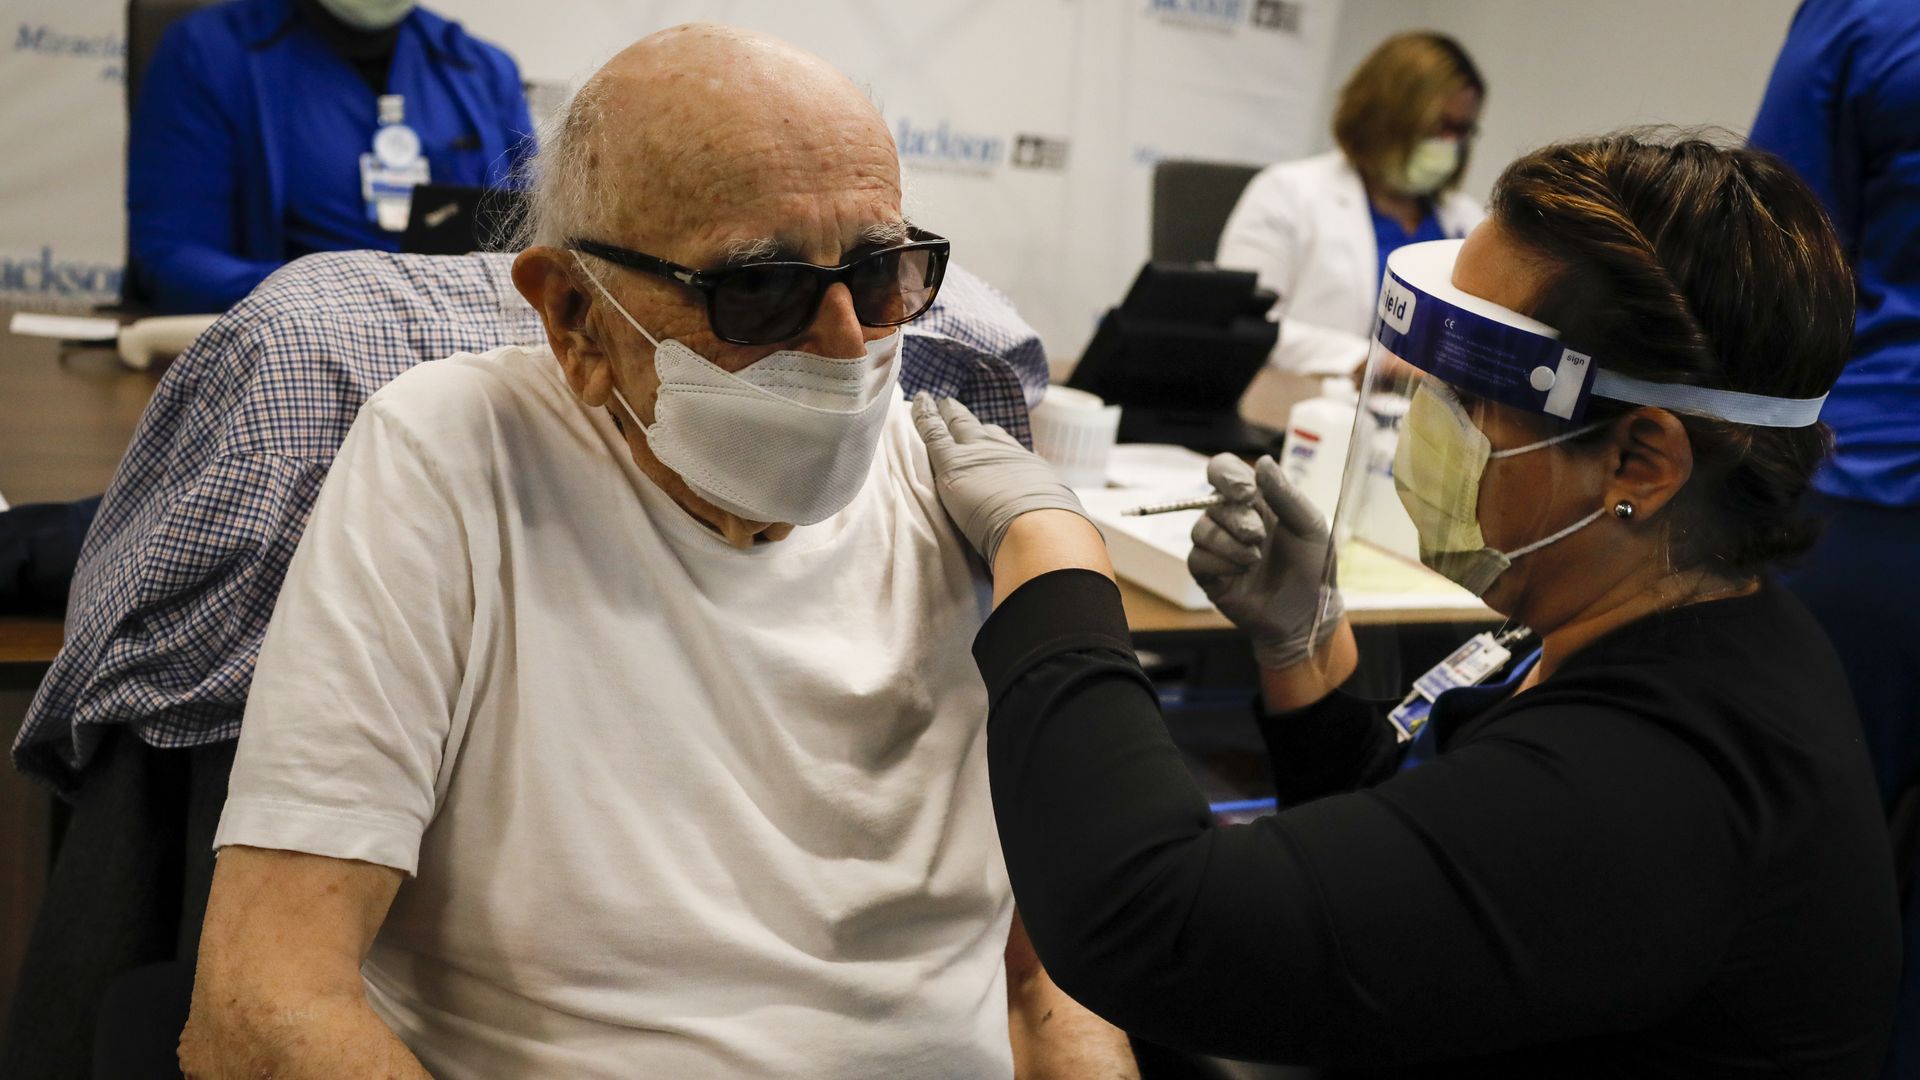 A healthcare worker giving a patient a dose of Pfizer/BioNTech's coronavirus vaccine in Miami on Dec. 30.